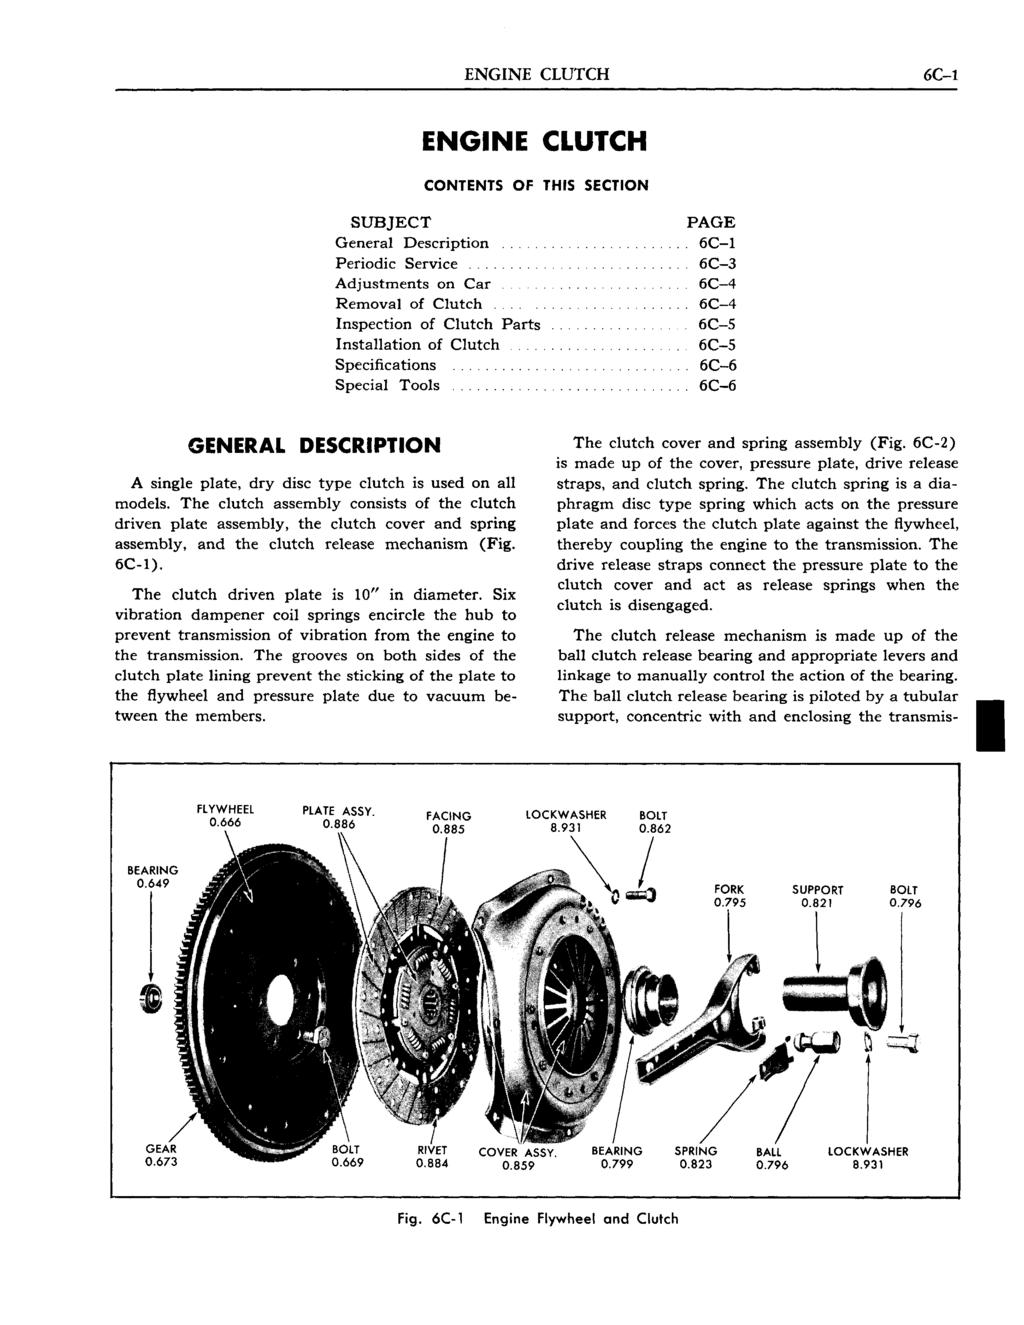 ENGINE CLUTCH 6C-l ENGINE CLUTCH CONTENTS OF THIS SECTION SUBJECT General Description Periodic Service Adjustments on Car Removal of Clutch Inspection of Clutch Parts Installation of Clutch